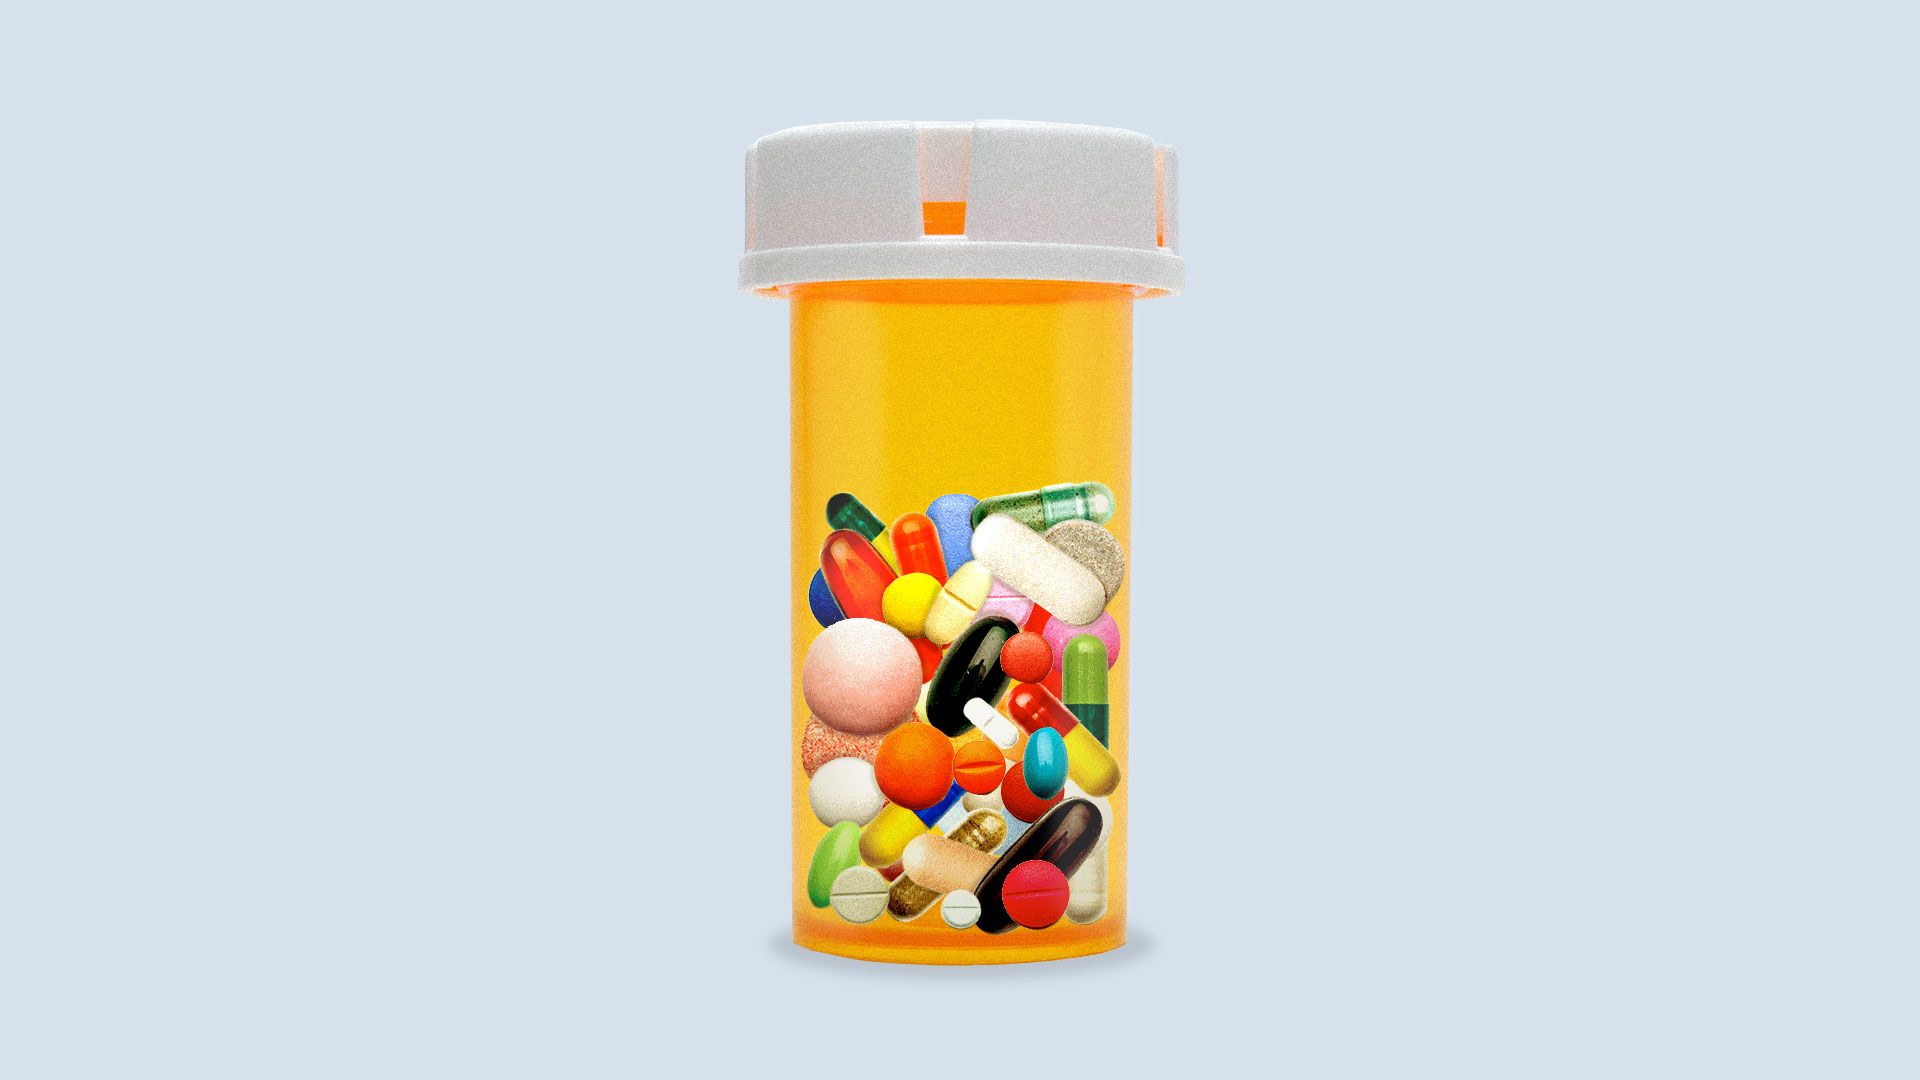 Illustration of pill bottle filled with pills of all shapes and colors